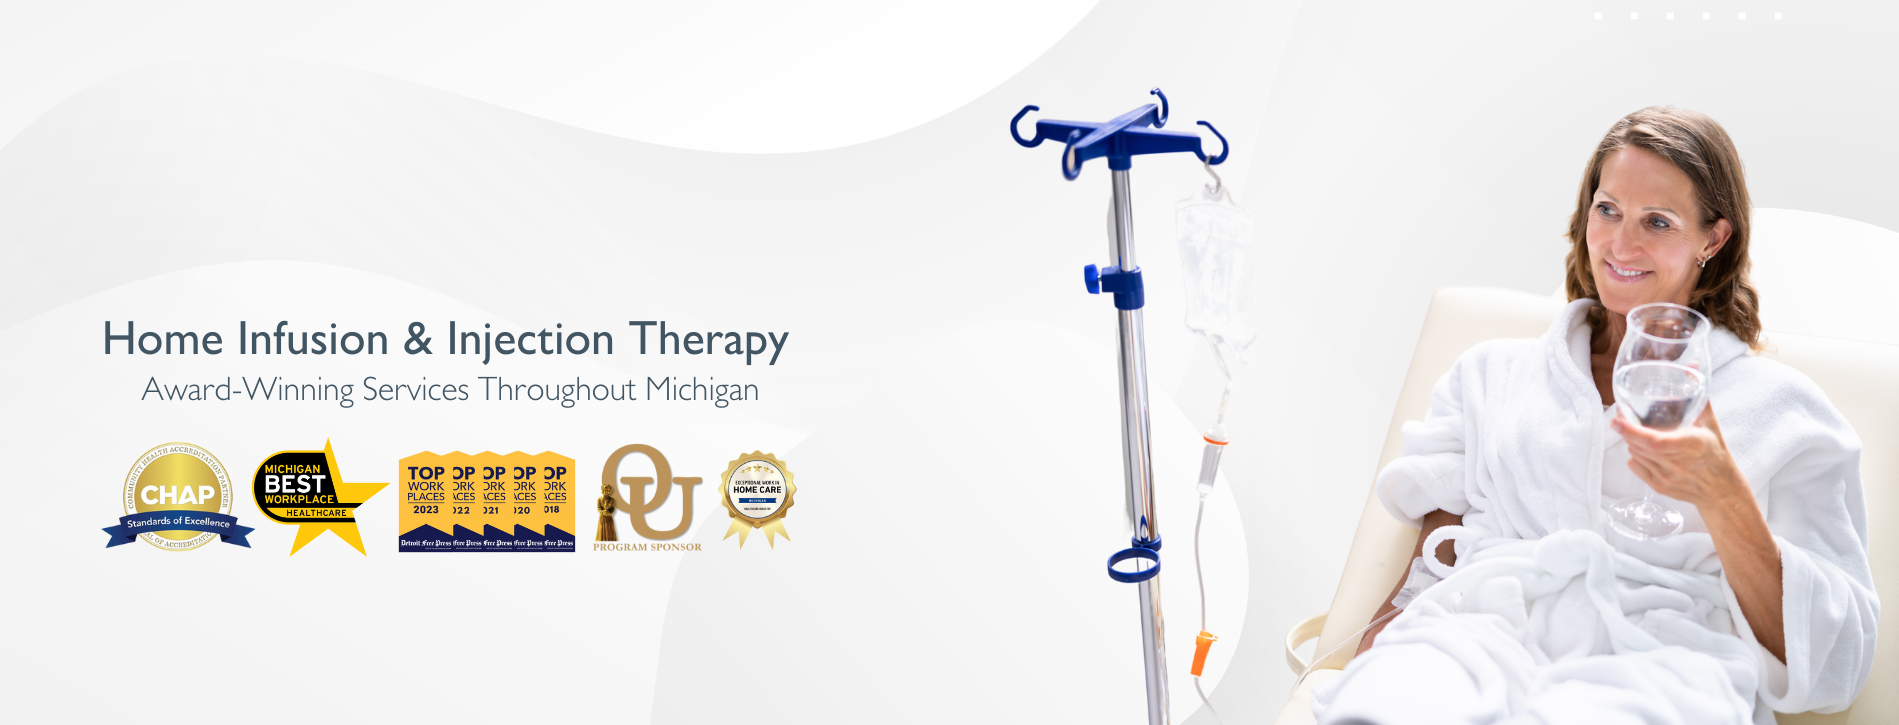 Metro Detroit's Top Choice for Home Infusion & Injection Therapy Services.